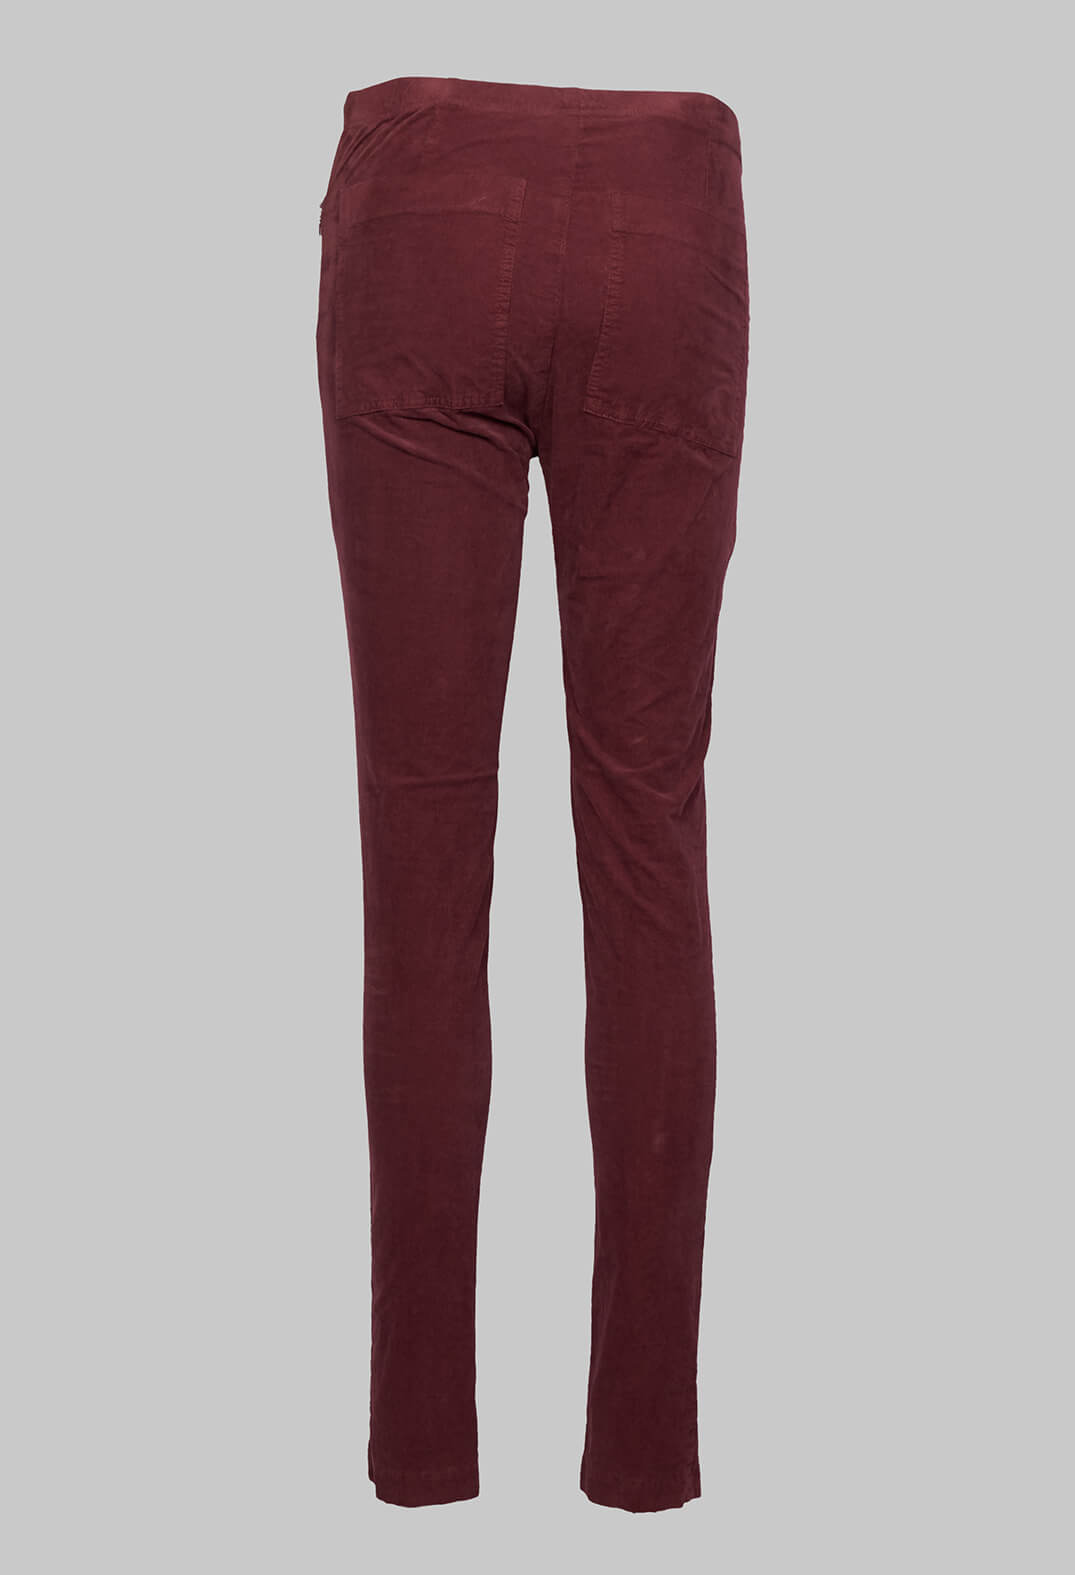 Skinny Fit Trousers in Wine